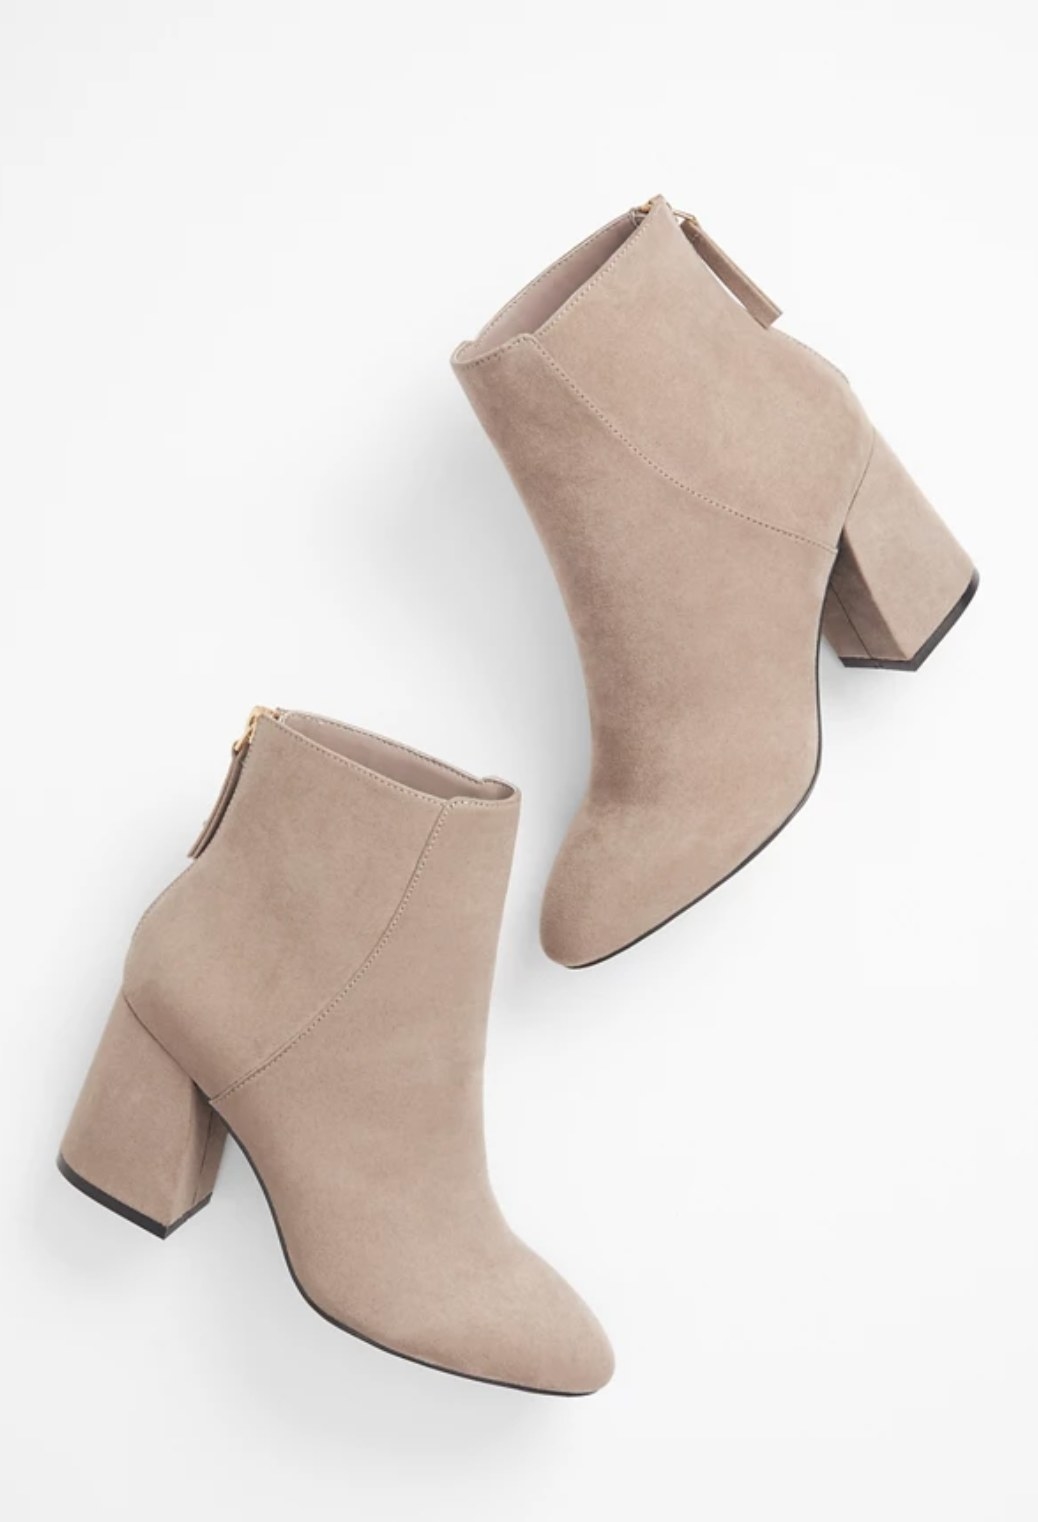 the ankle booties in light tan